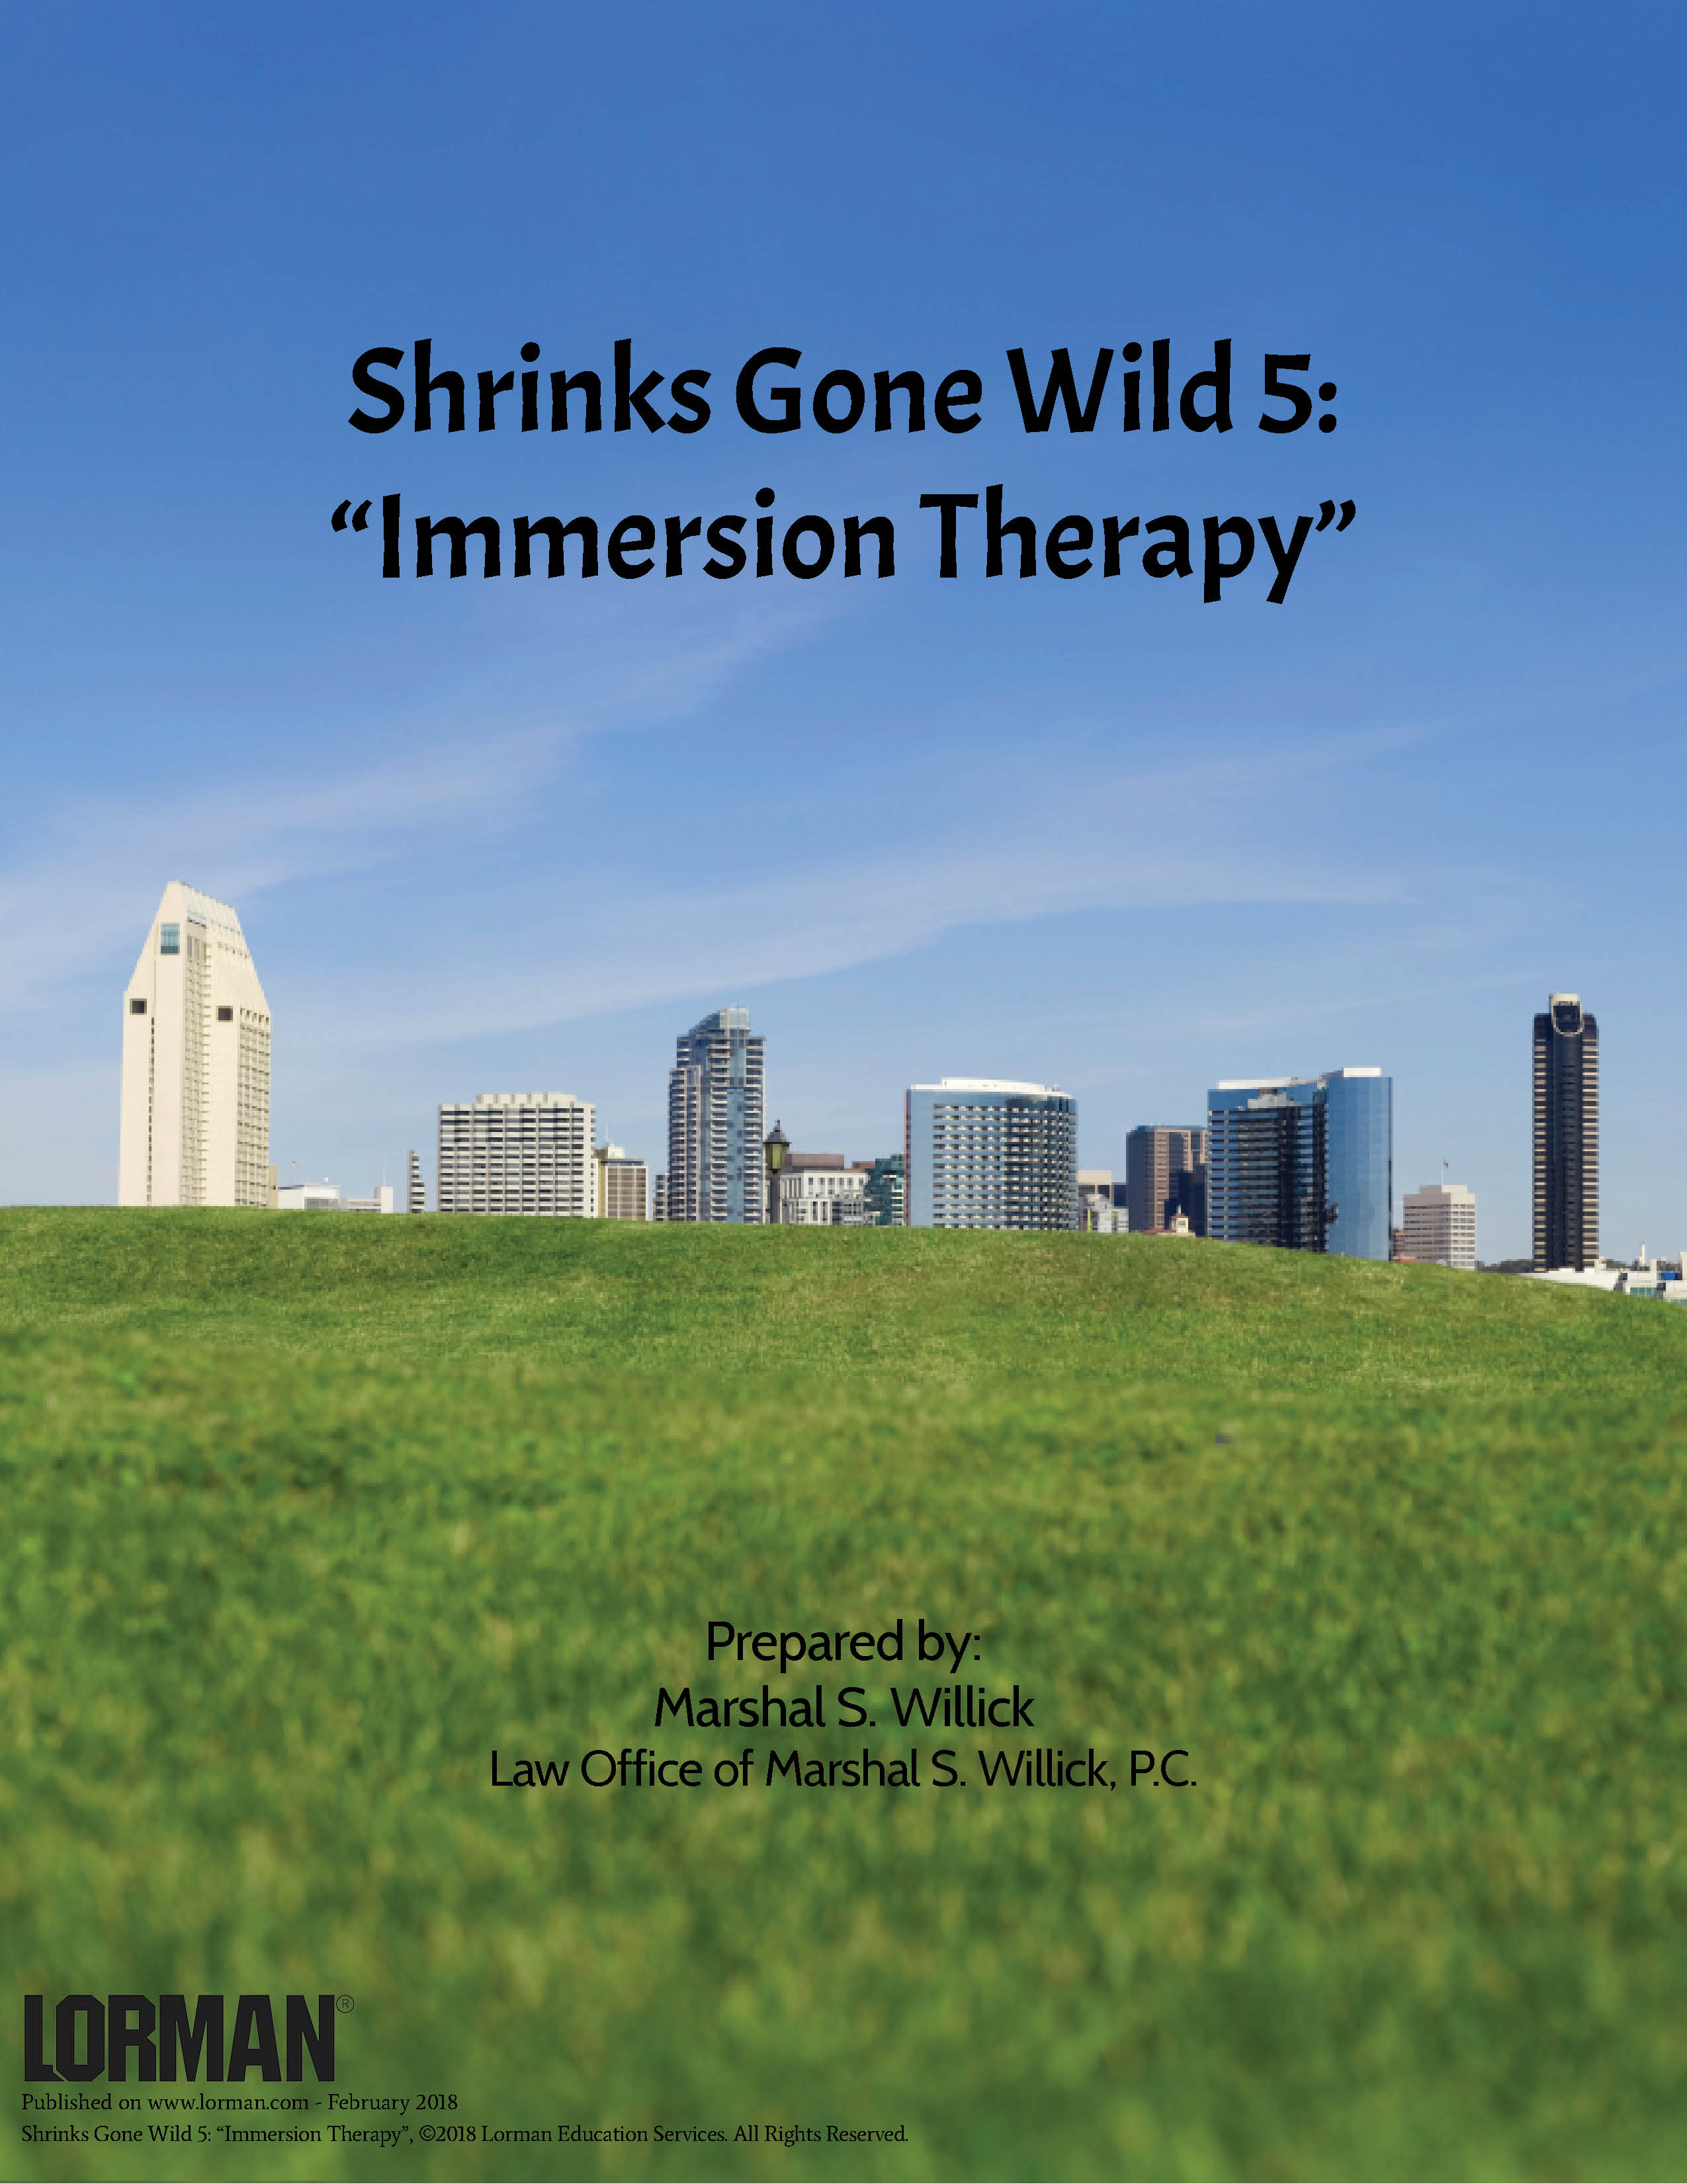 Shrinks Gone Wild 5: “Immersion Therapy”